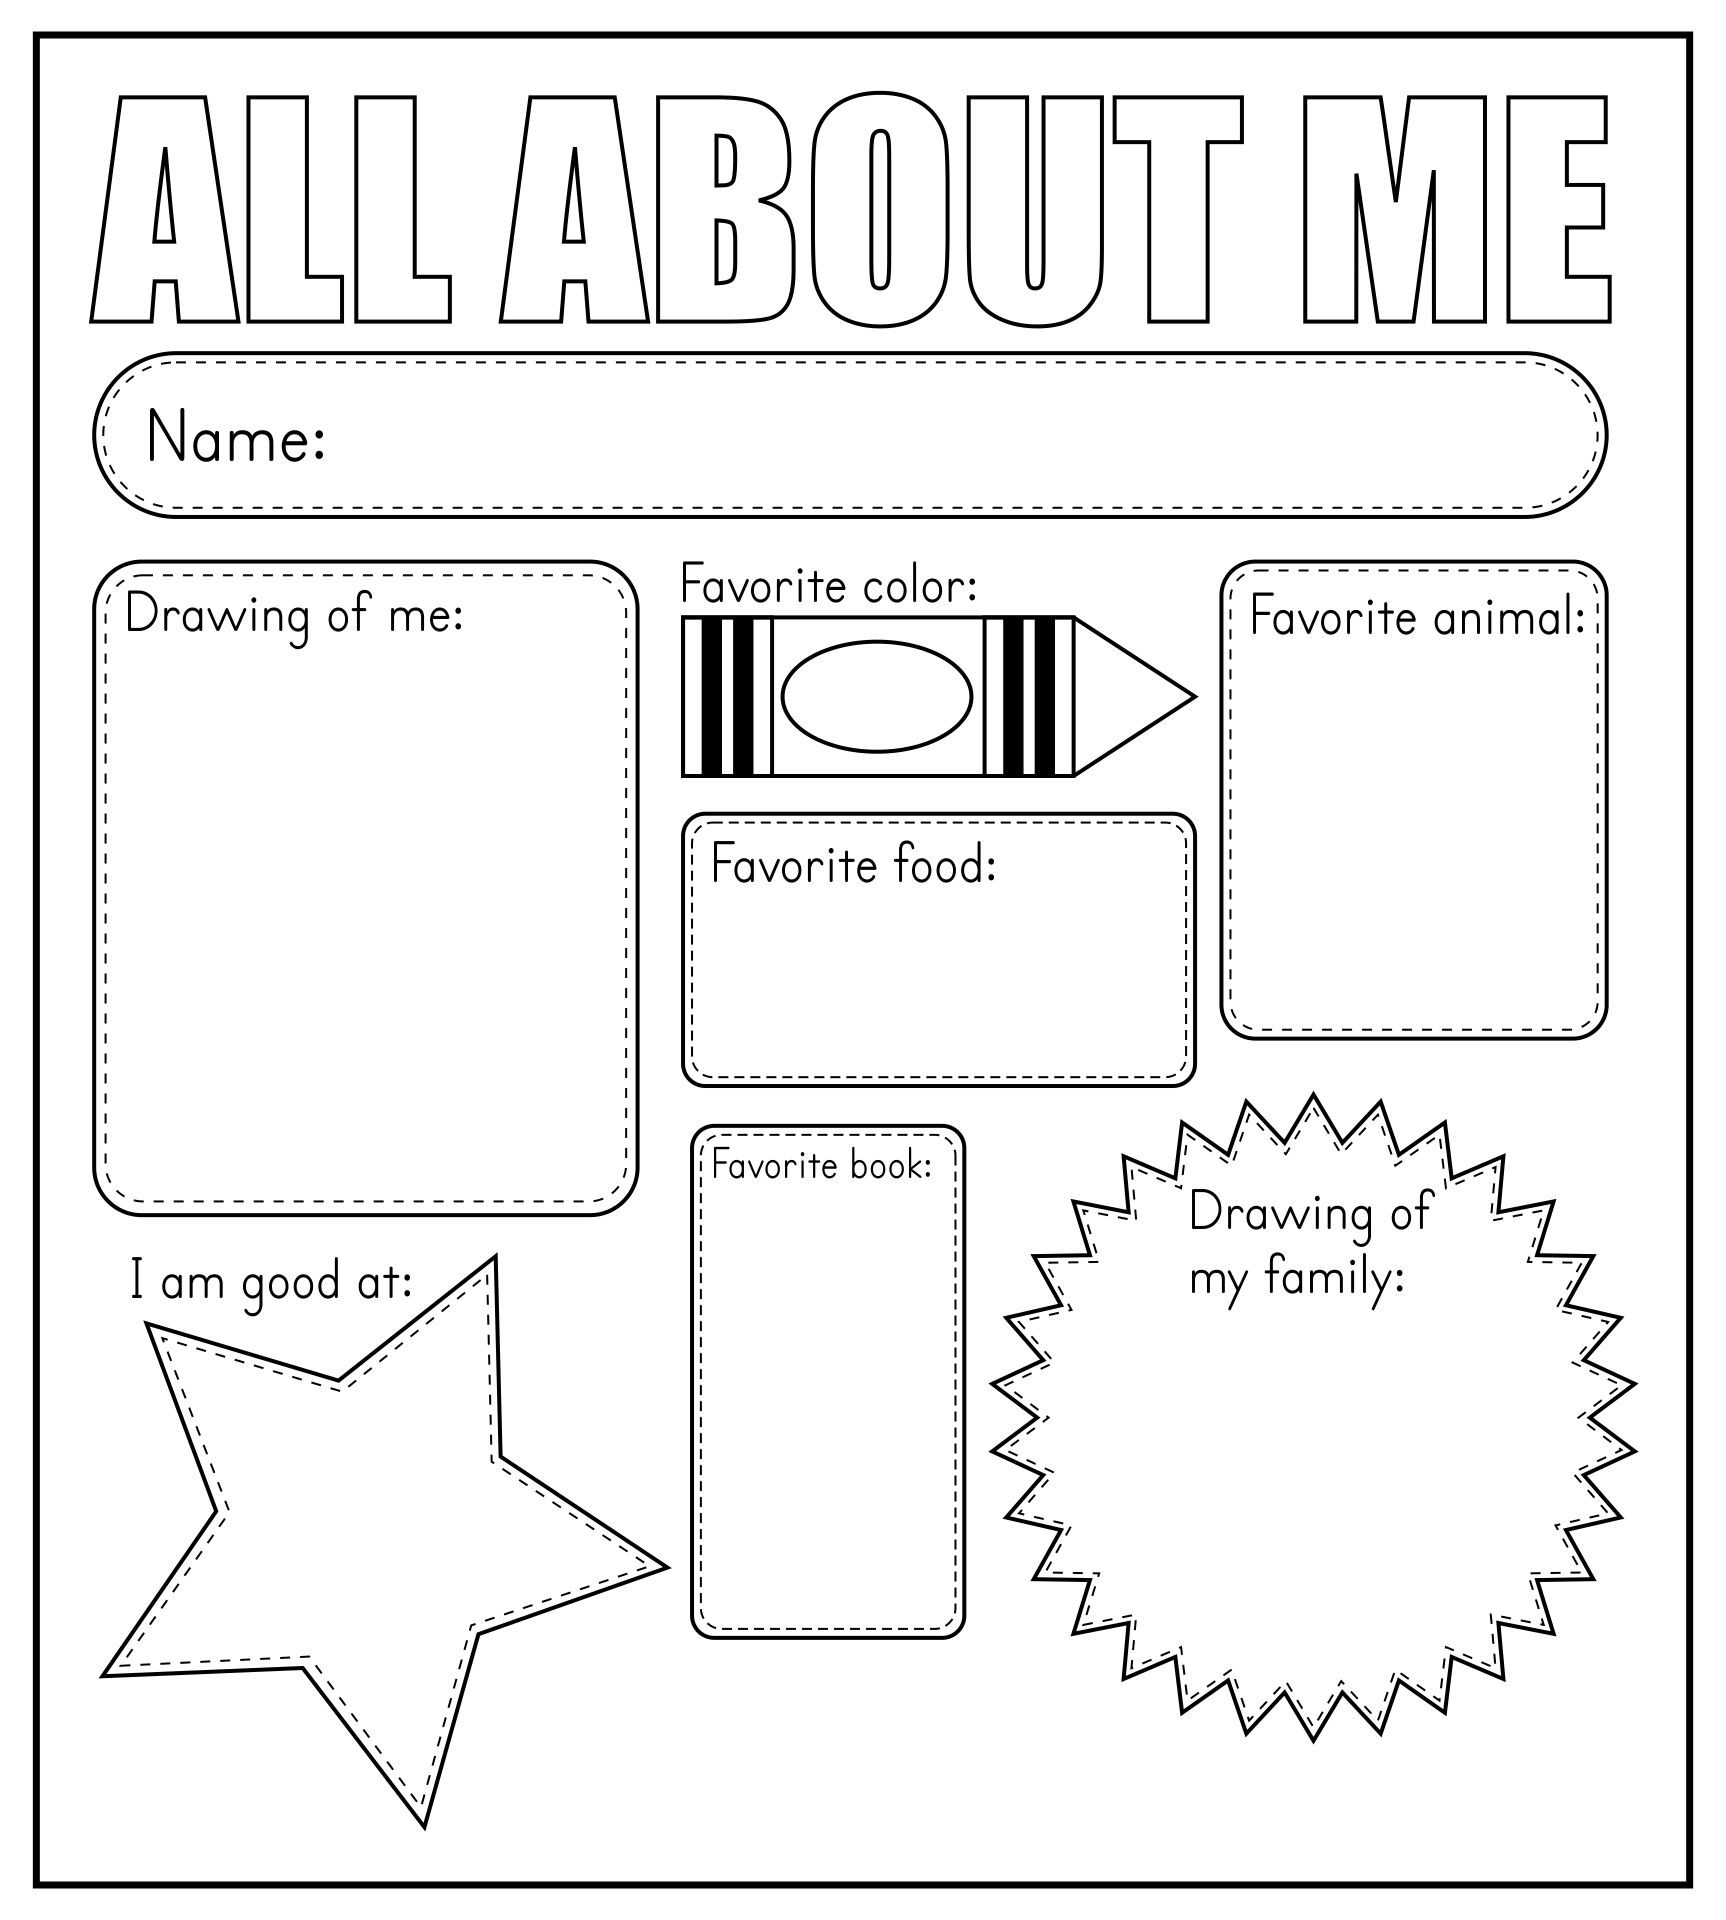 all-about-me-printable-template-printable-templates